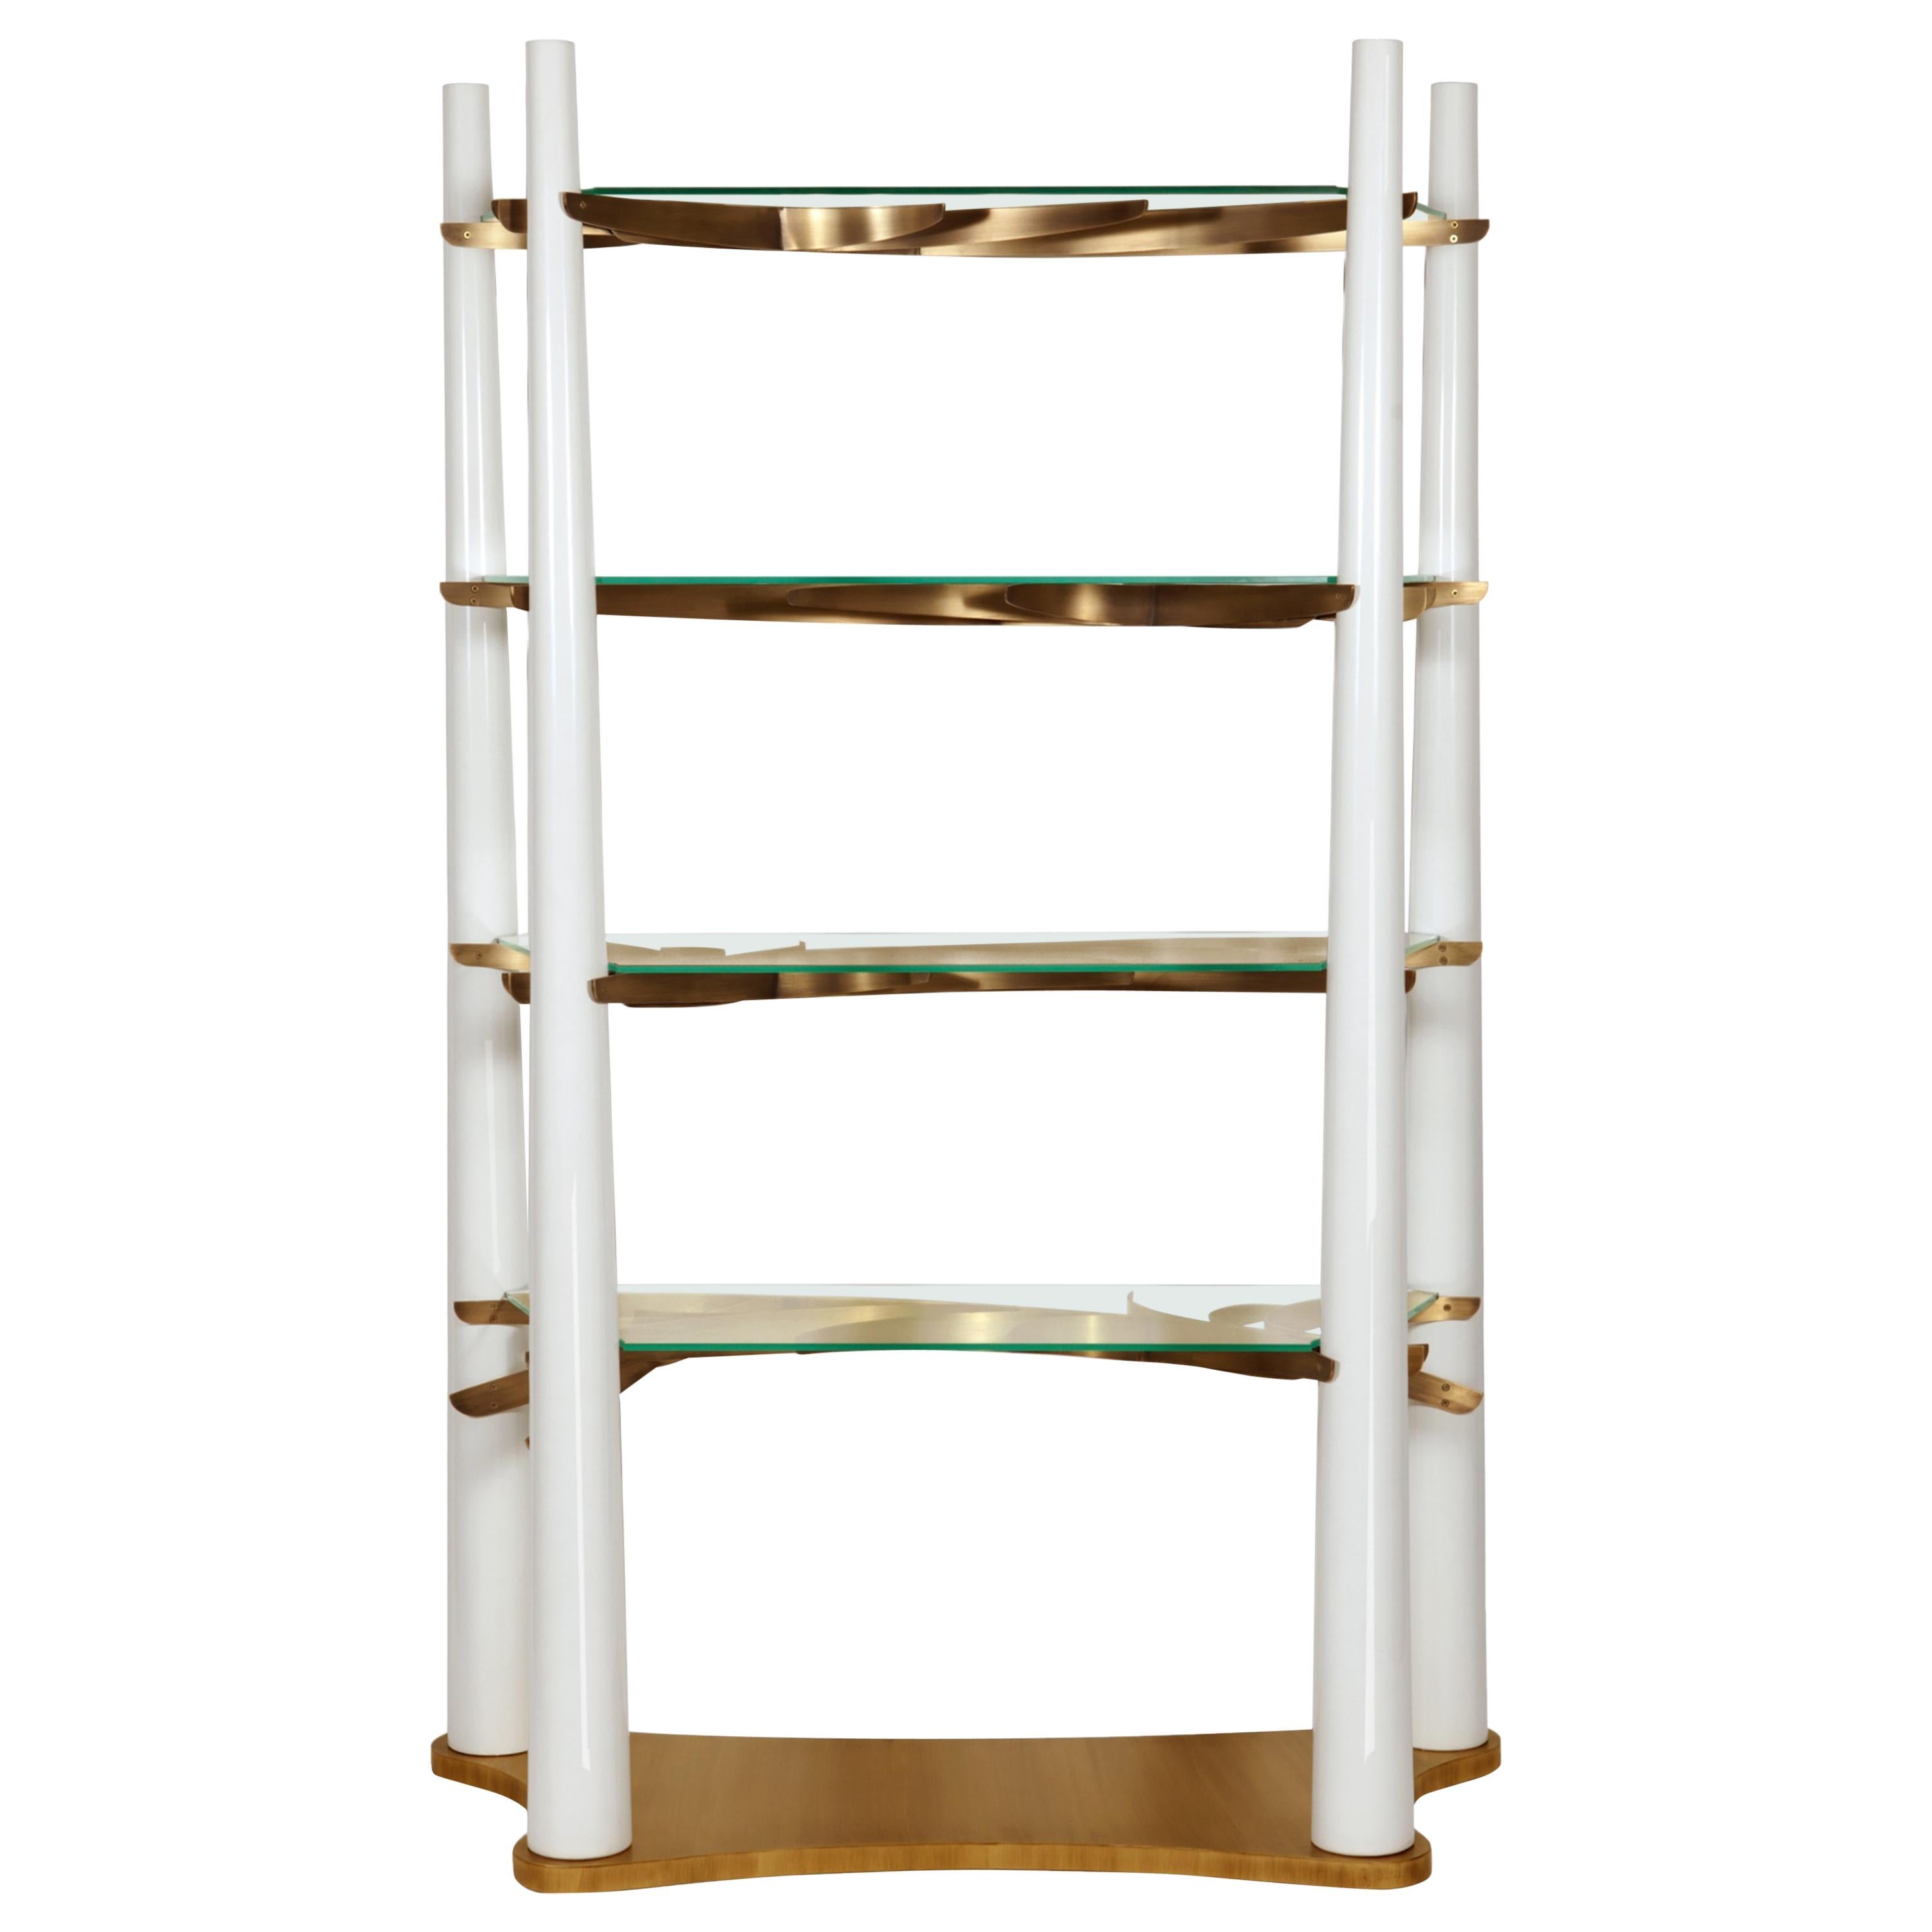 Into The Woods Bookcase, White and Brass, InsidherLand by Joana Santos Barbosa